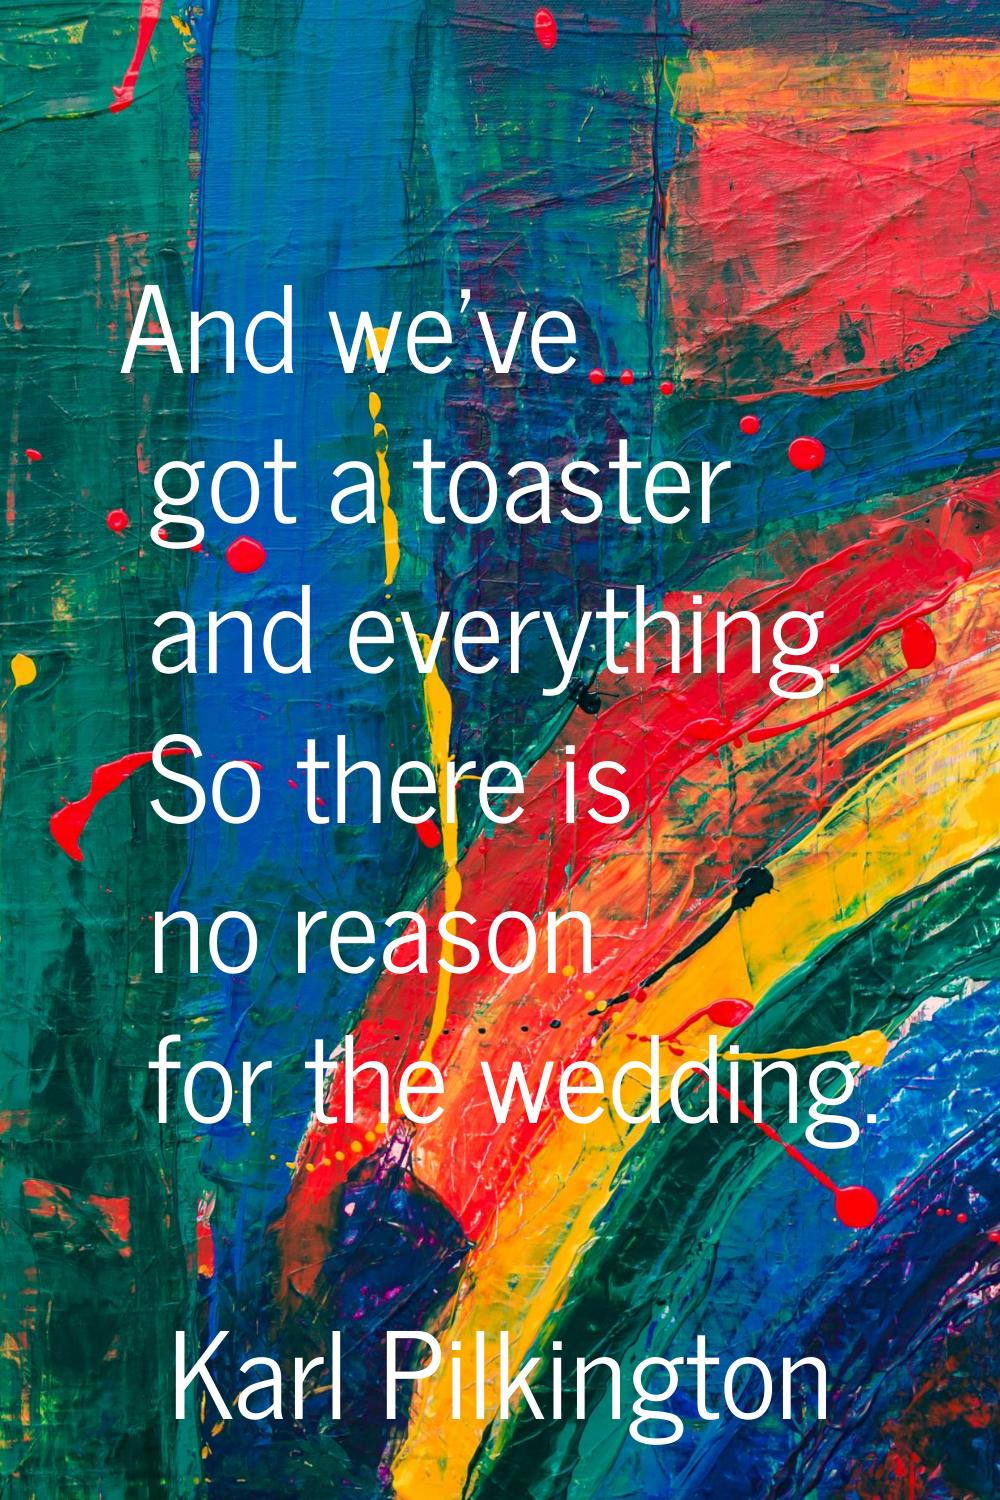 And we've got a toaster and everything. So there is no reason for the wedding.